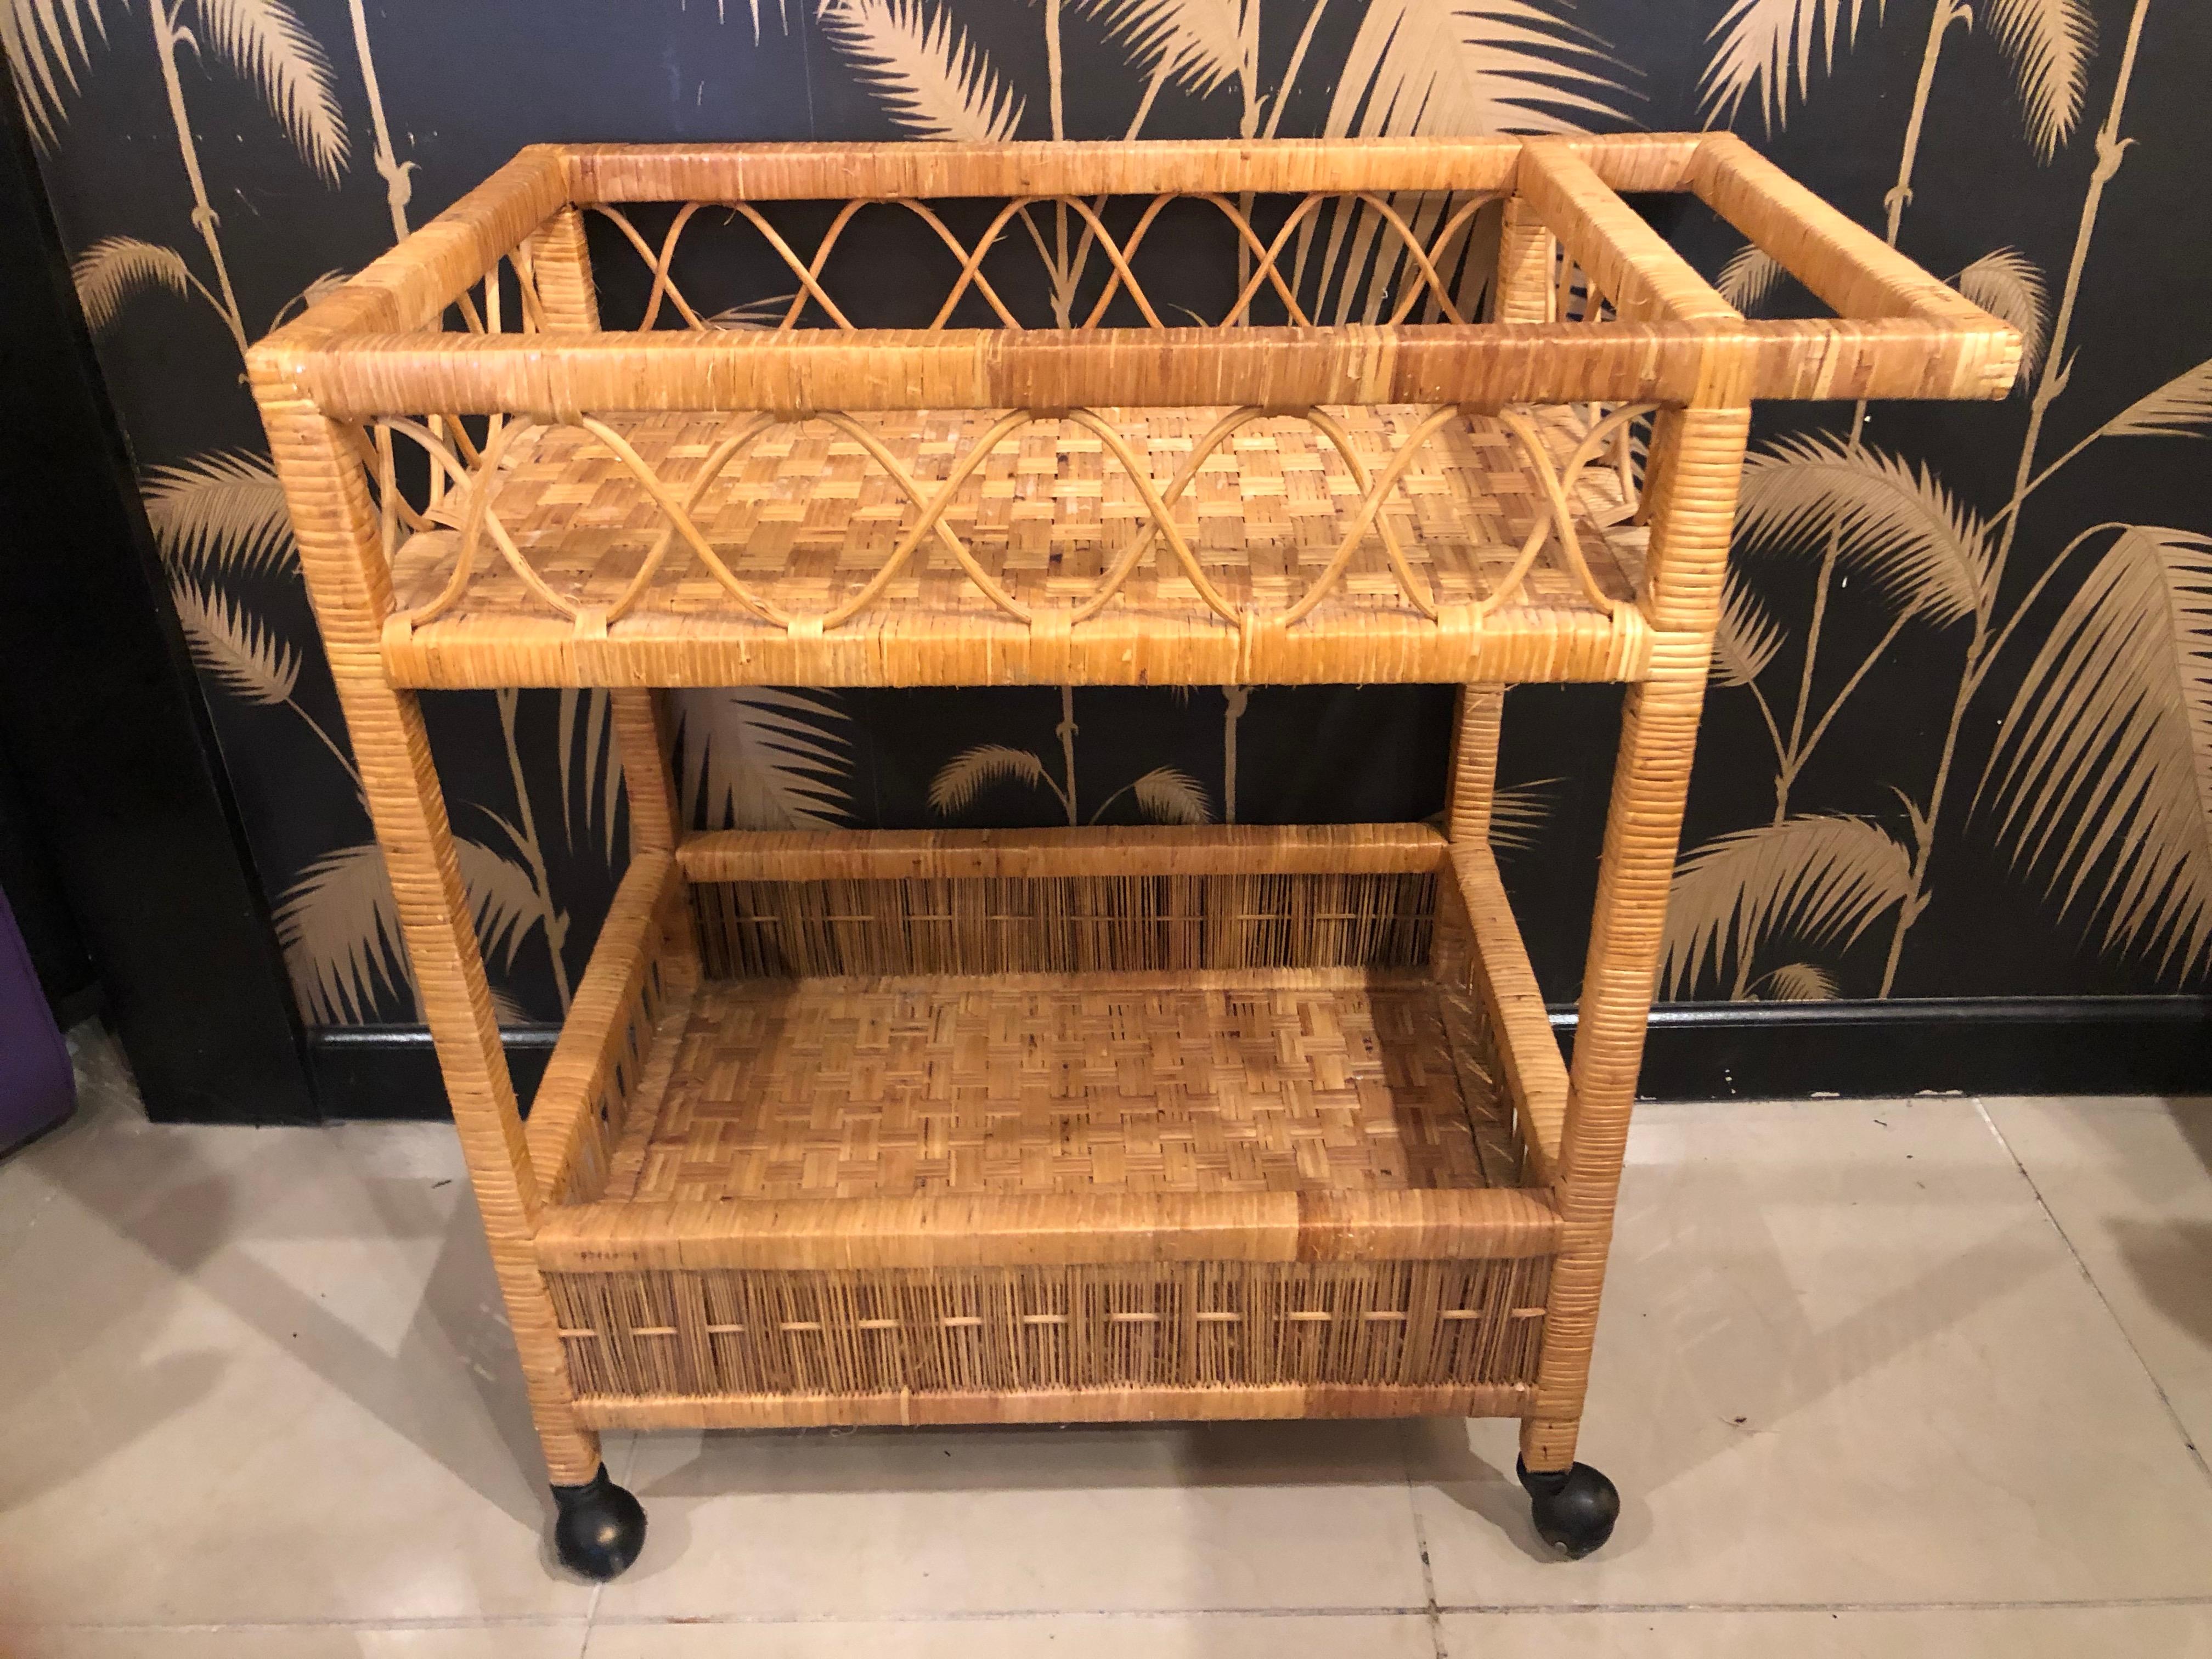 Vintage wicker and rattan bart serving cart. No broken or missing rattan or wicker. Two shelves. Black castors. If needed you can add glass shelves to the shelves. Additional cost will apply.